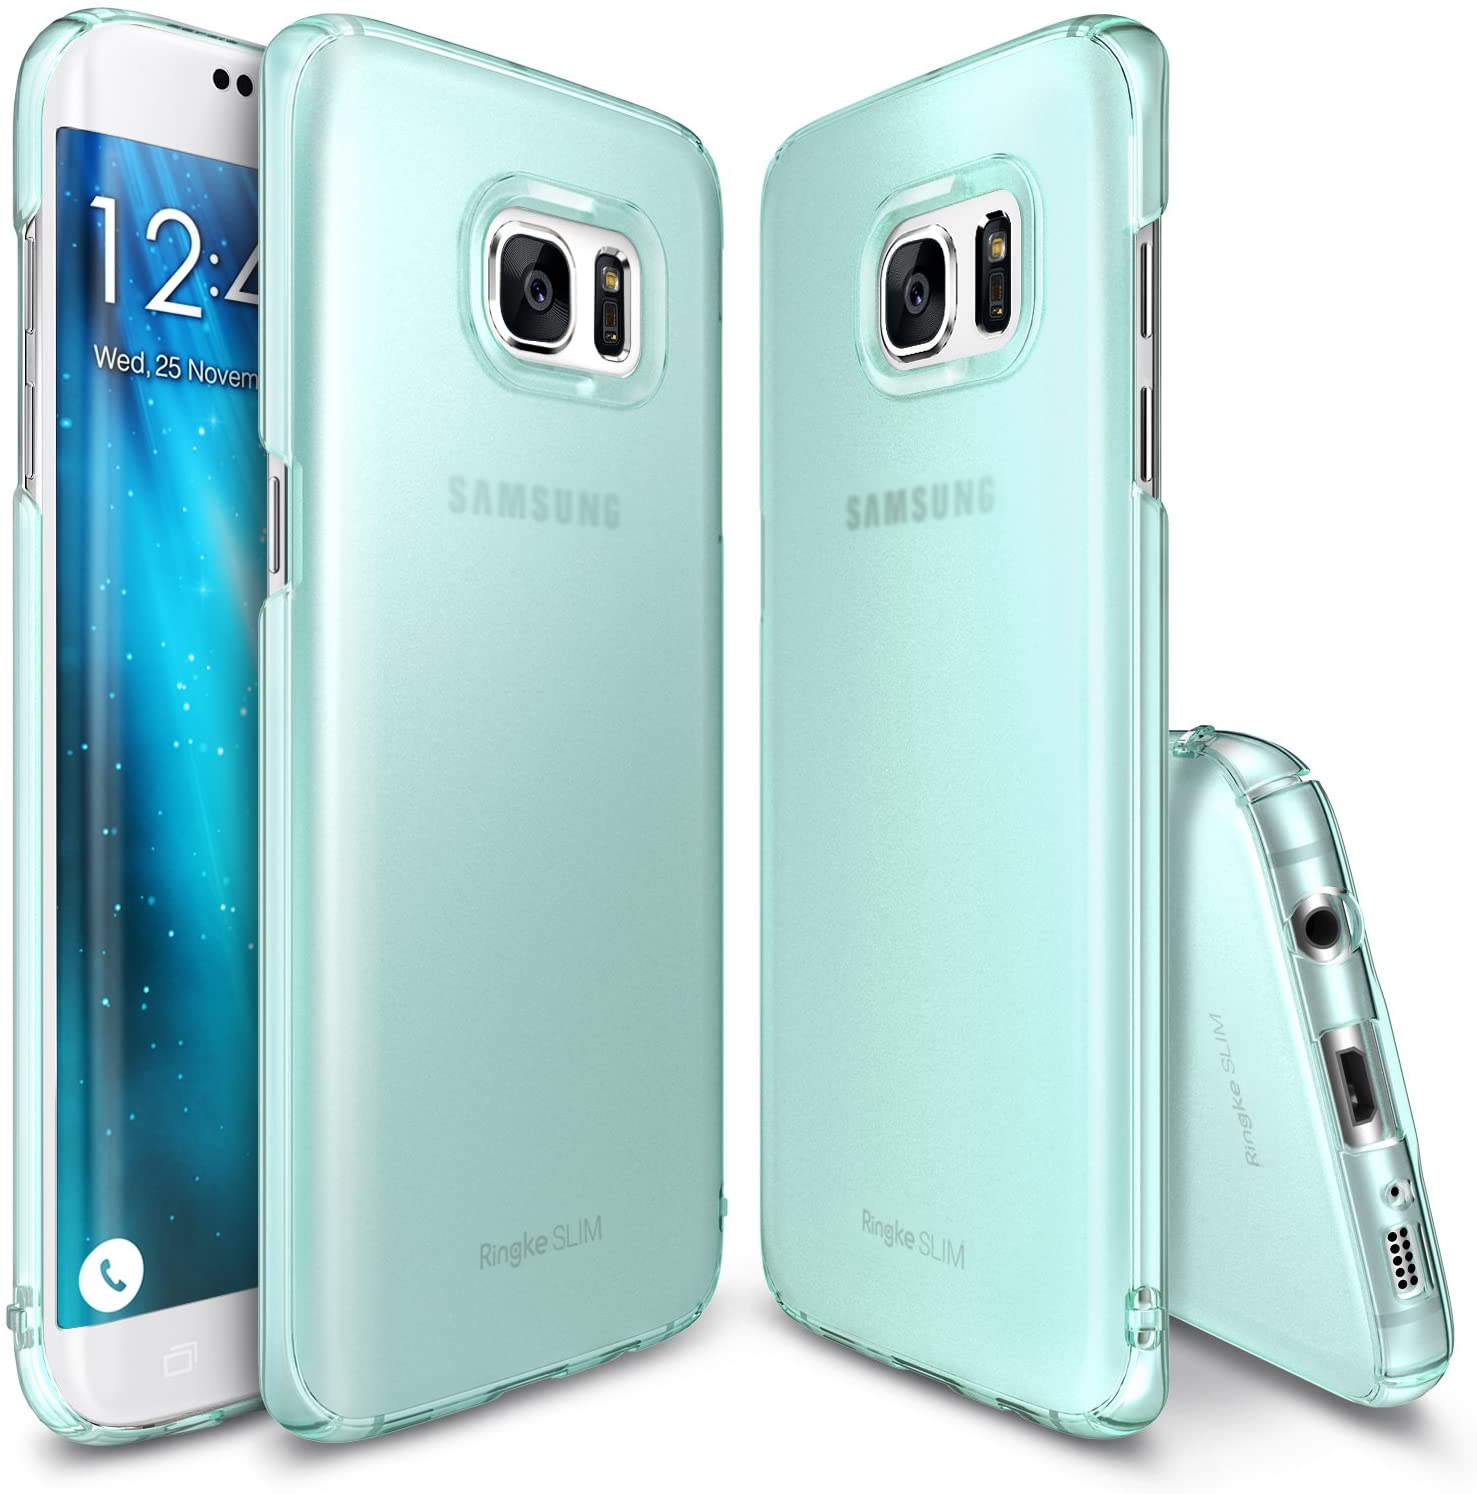 ringke slim premium pc hard cover case for galaxy s7 edge frost mint